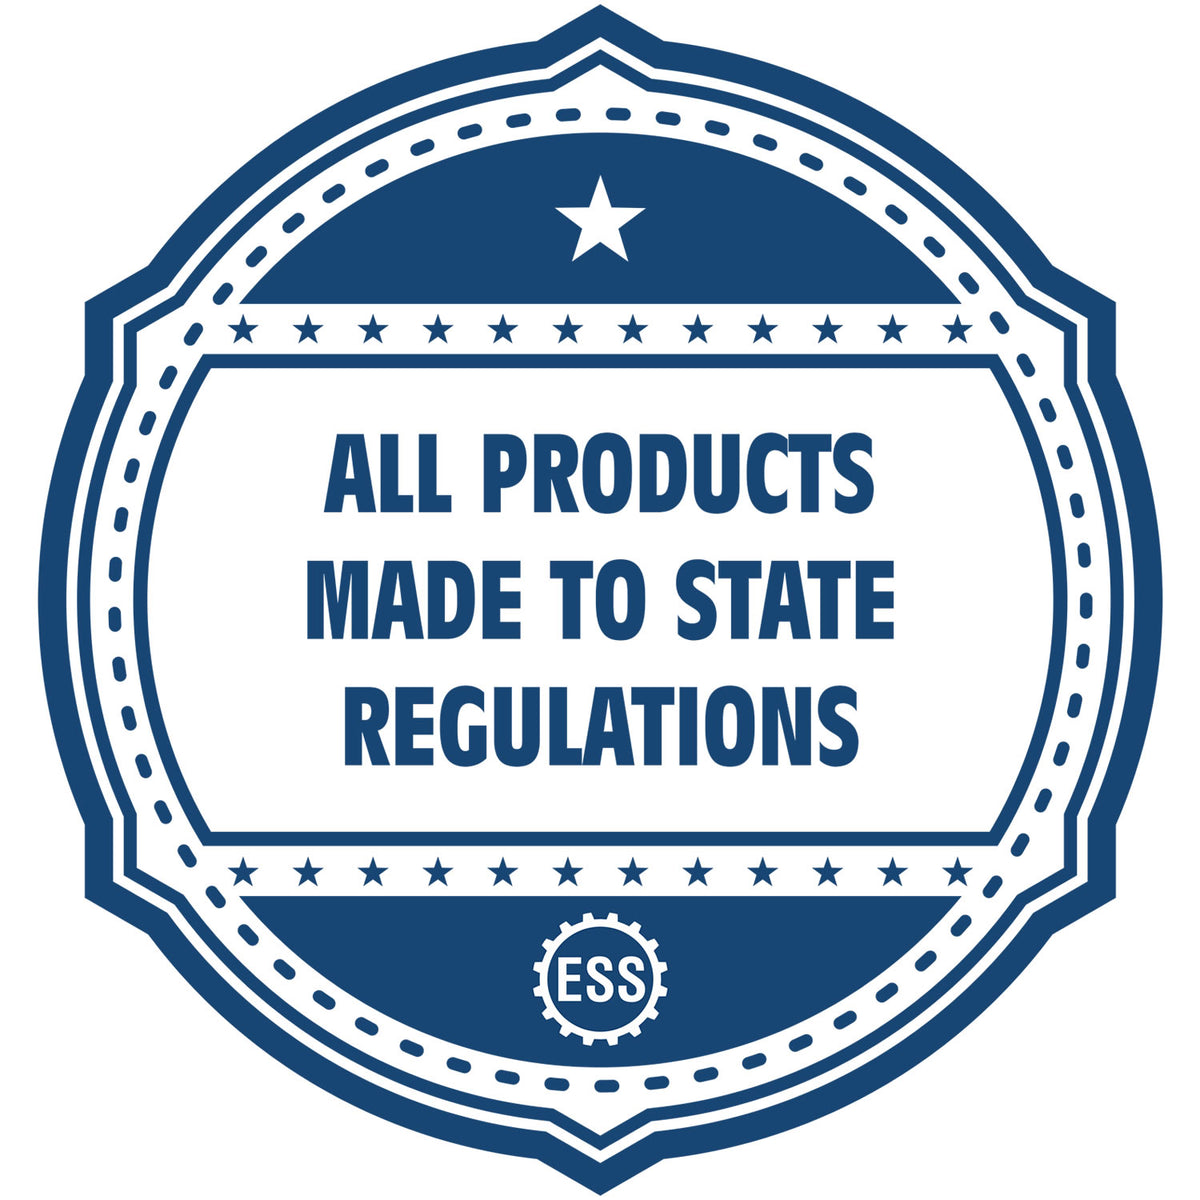 An icon or badge element for the Self-Inking State Seal South Carolina Notary Stamp showing that this product is made in compliance with state regulations.